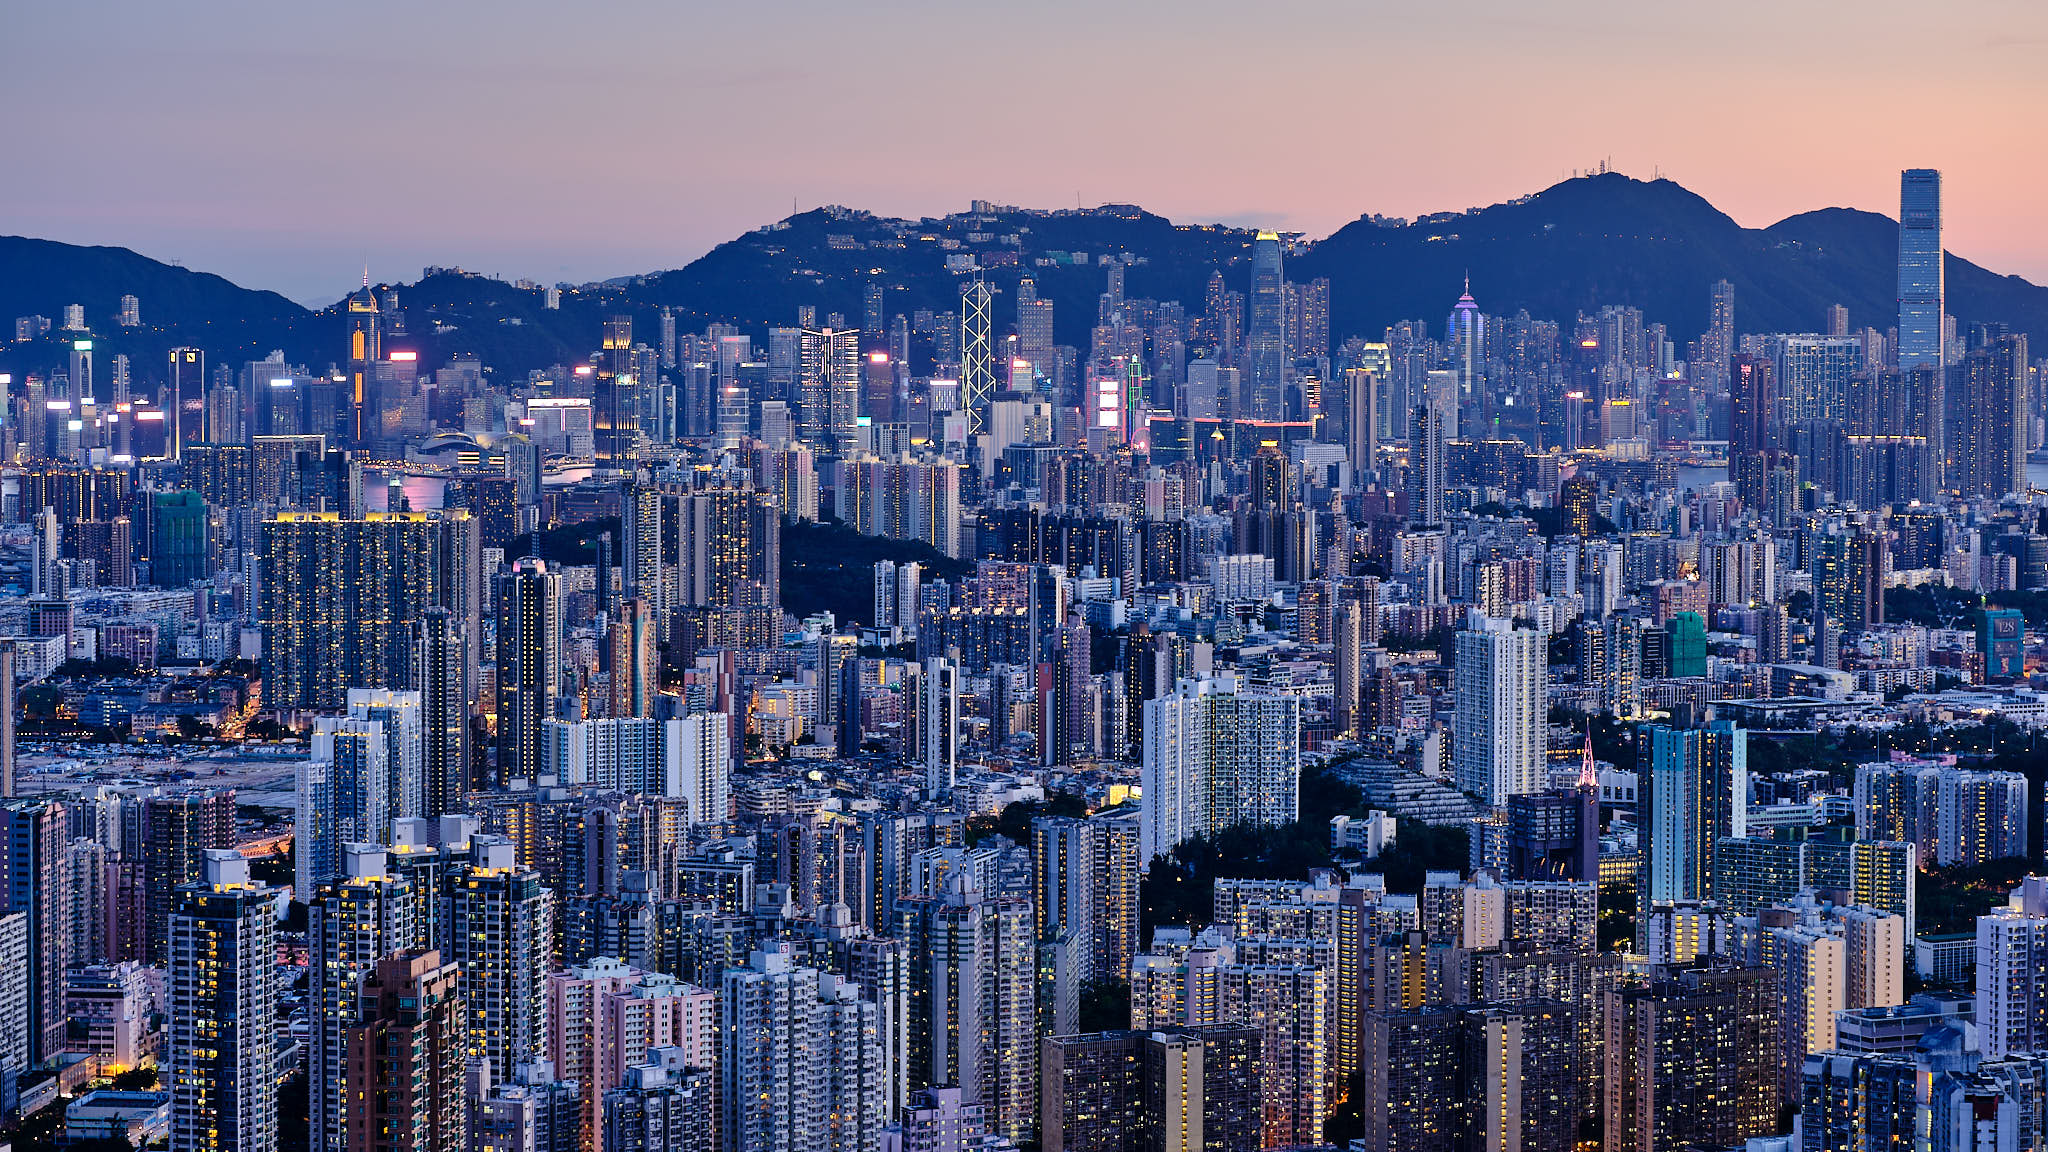 Blue hour overlooking Kowloon and Hong Kong Island from Sha Tin Pass Road